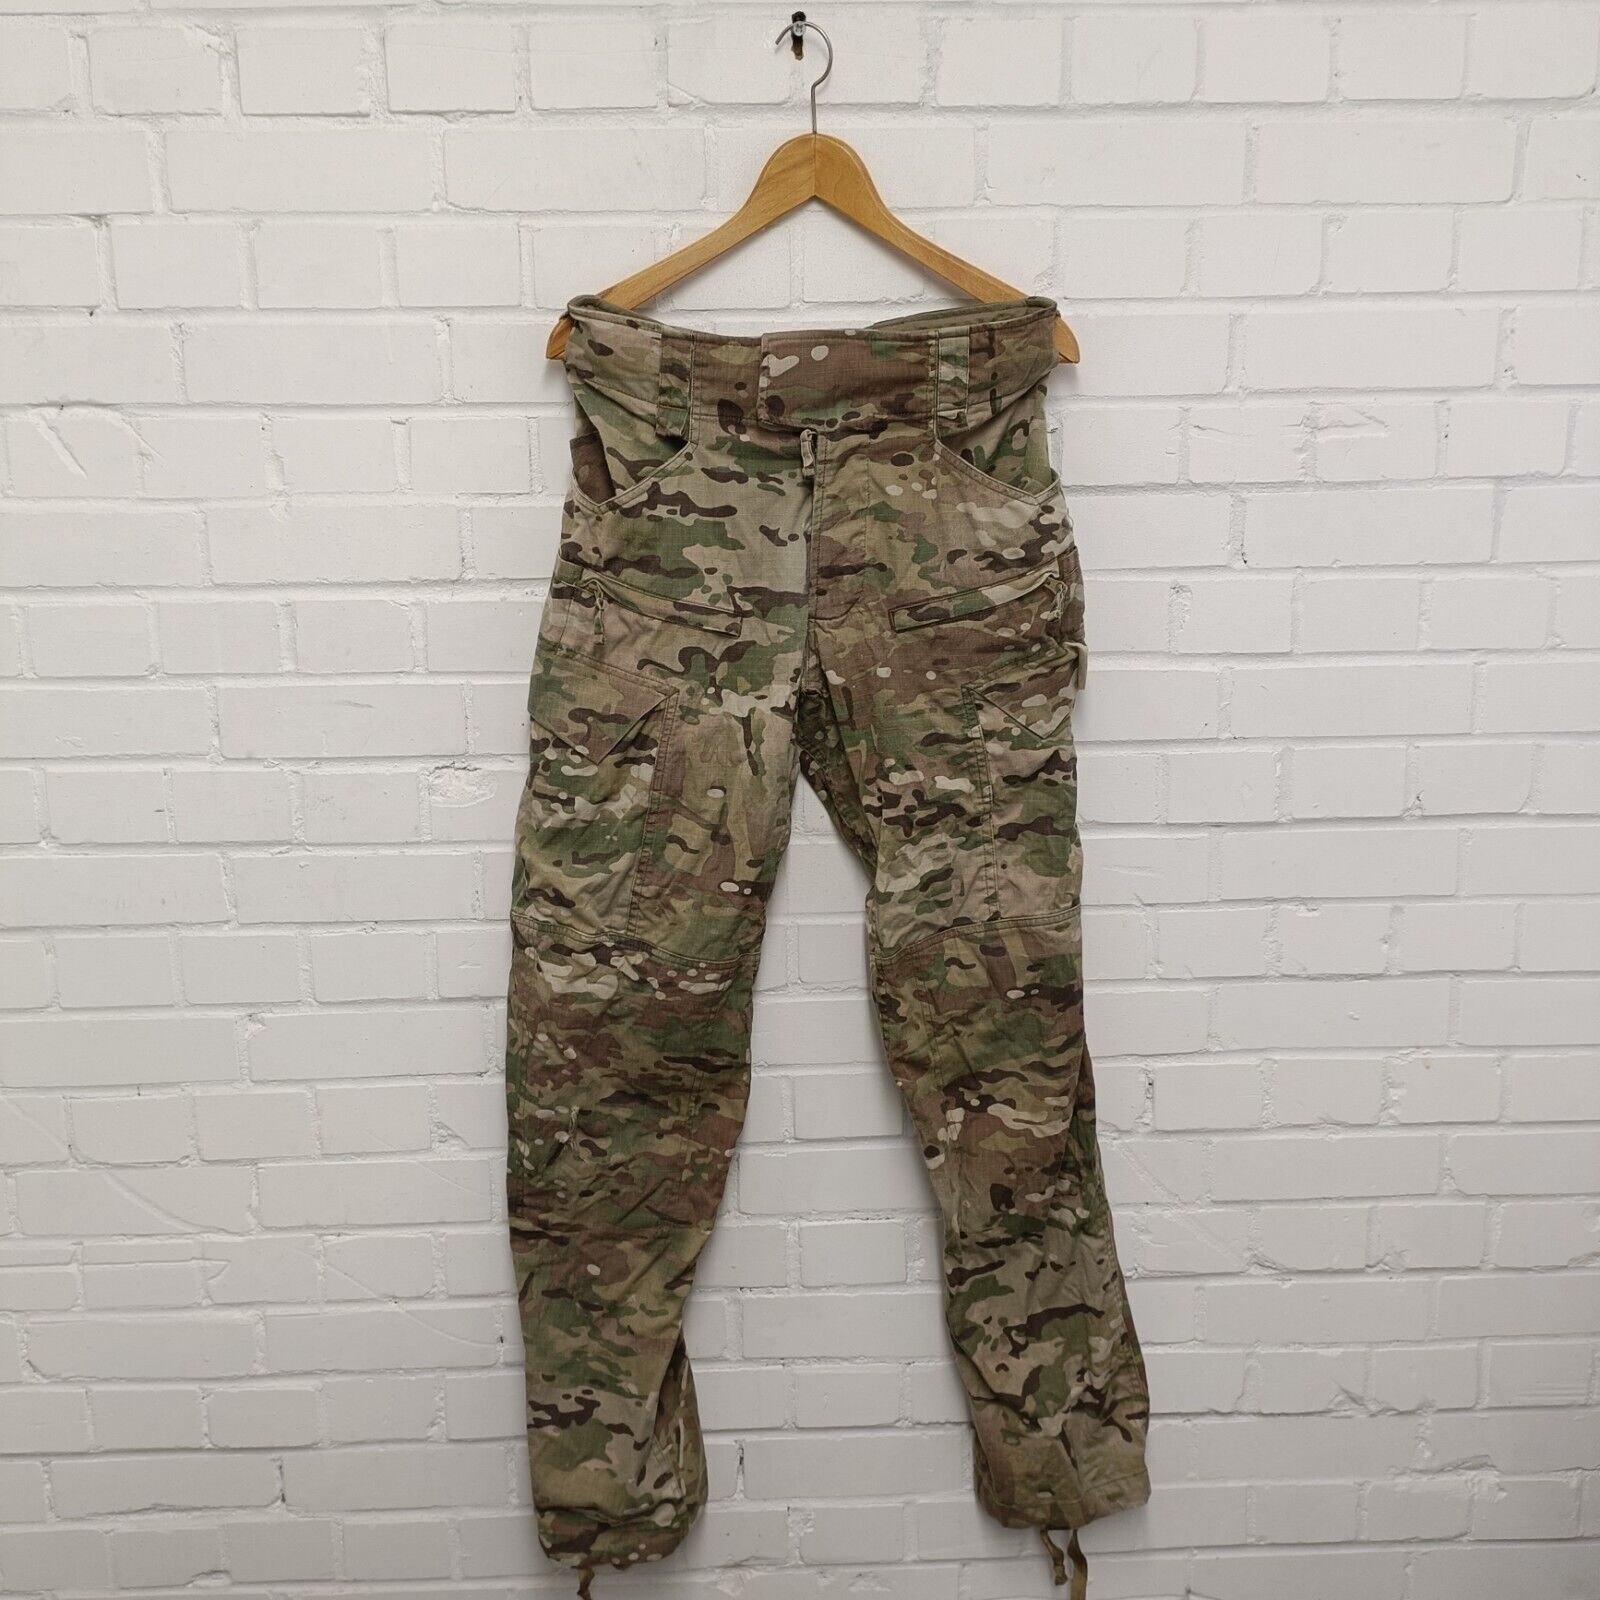 Crye Precision Combat Pant Trousers, 32 Long Nspa G4 MTP Camo Army DEFECT